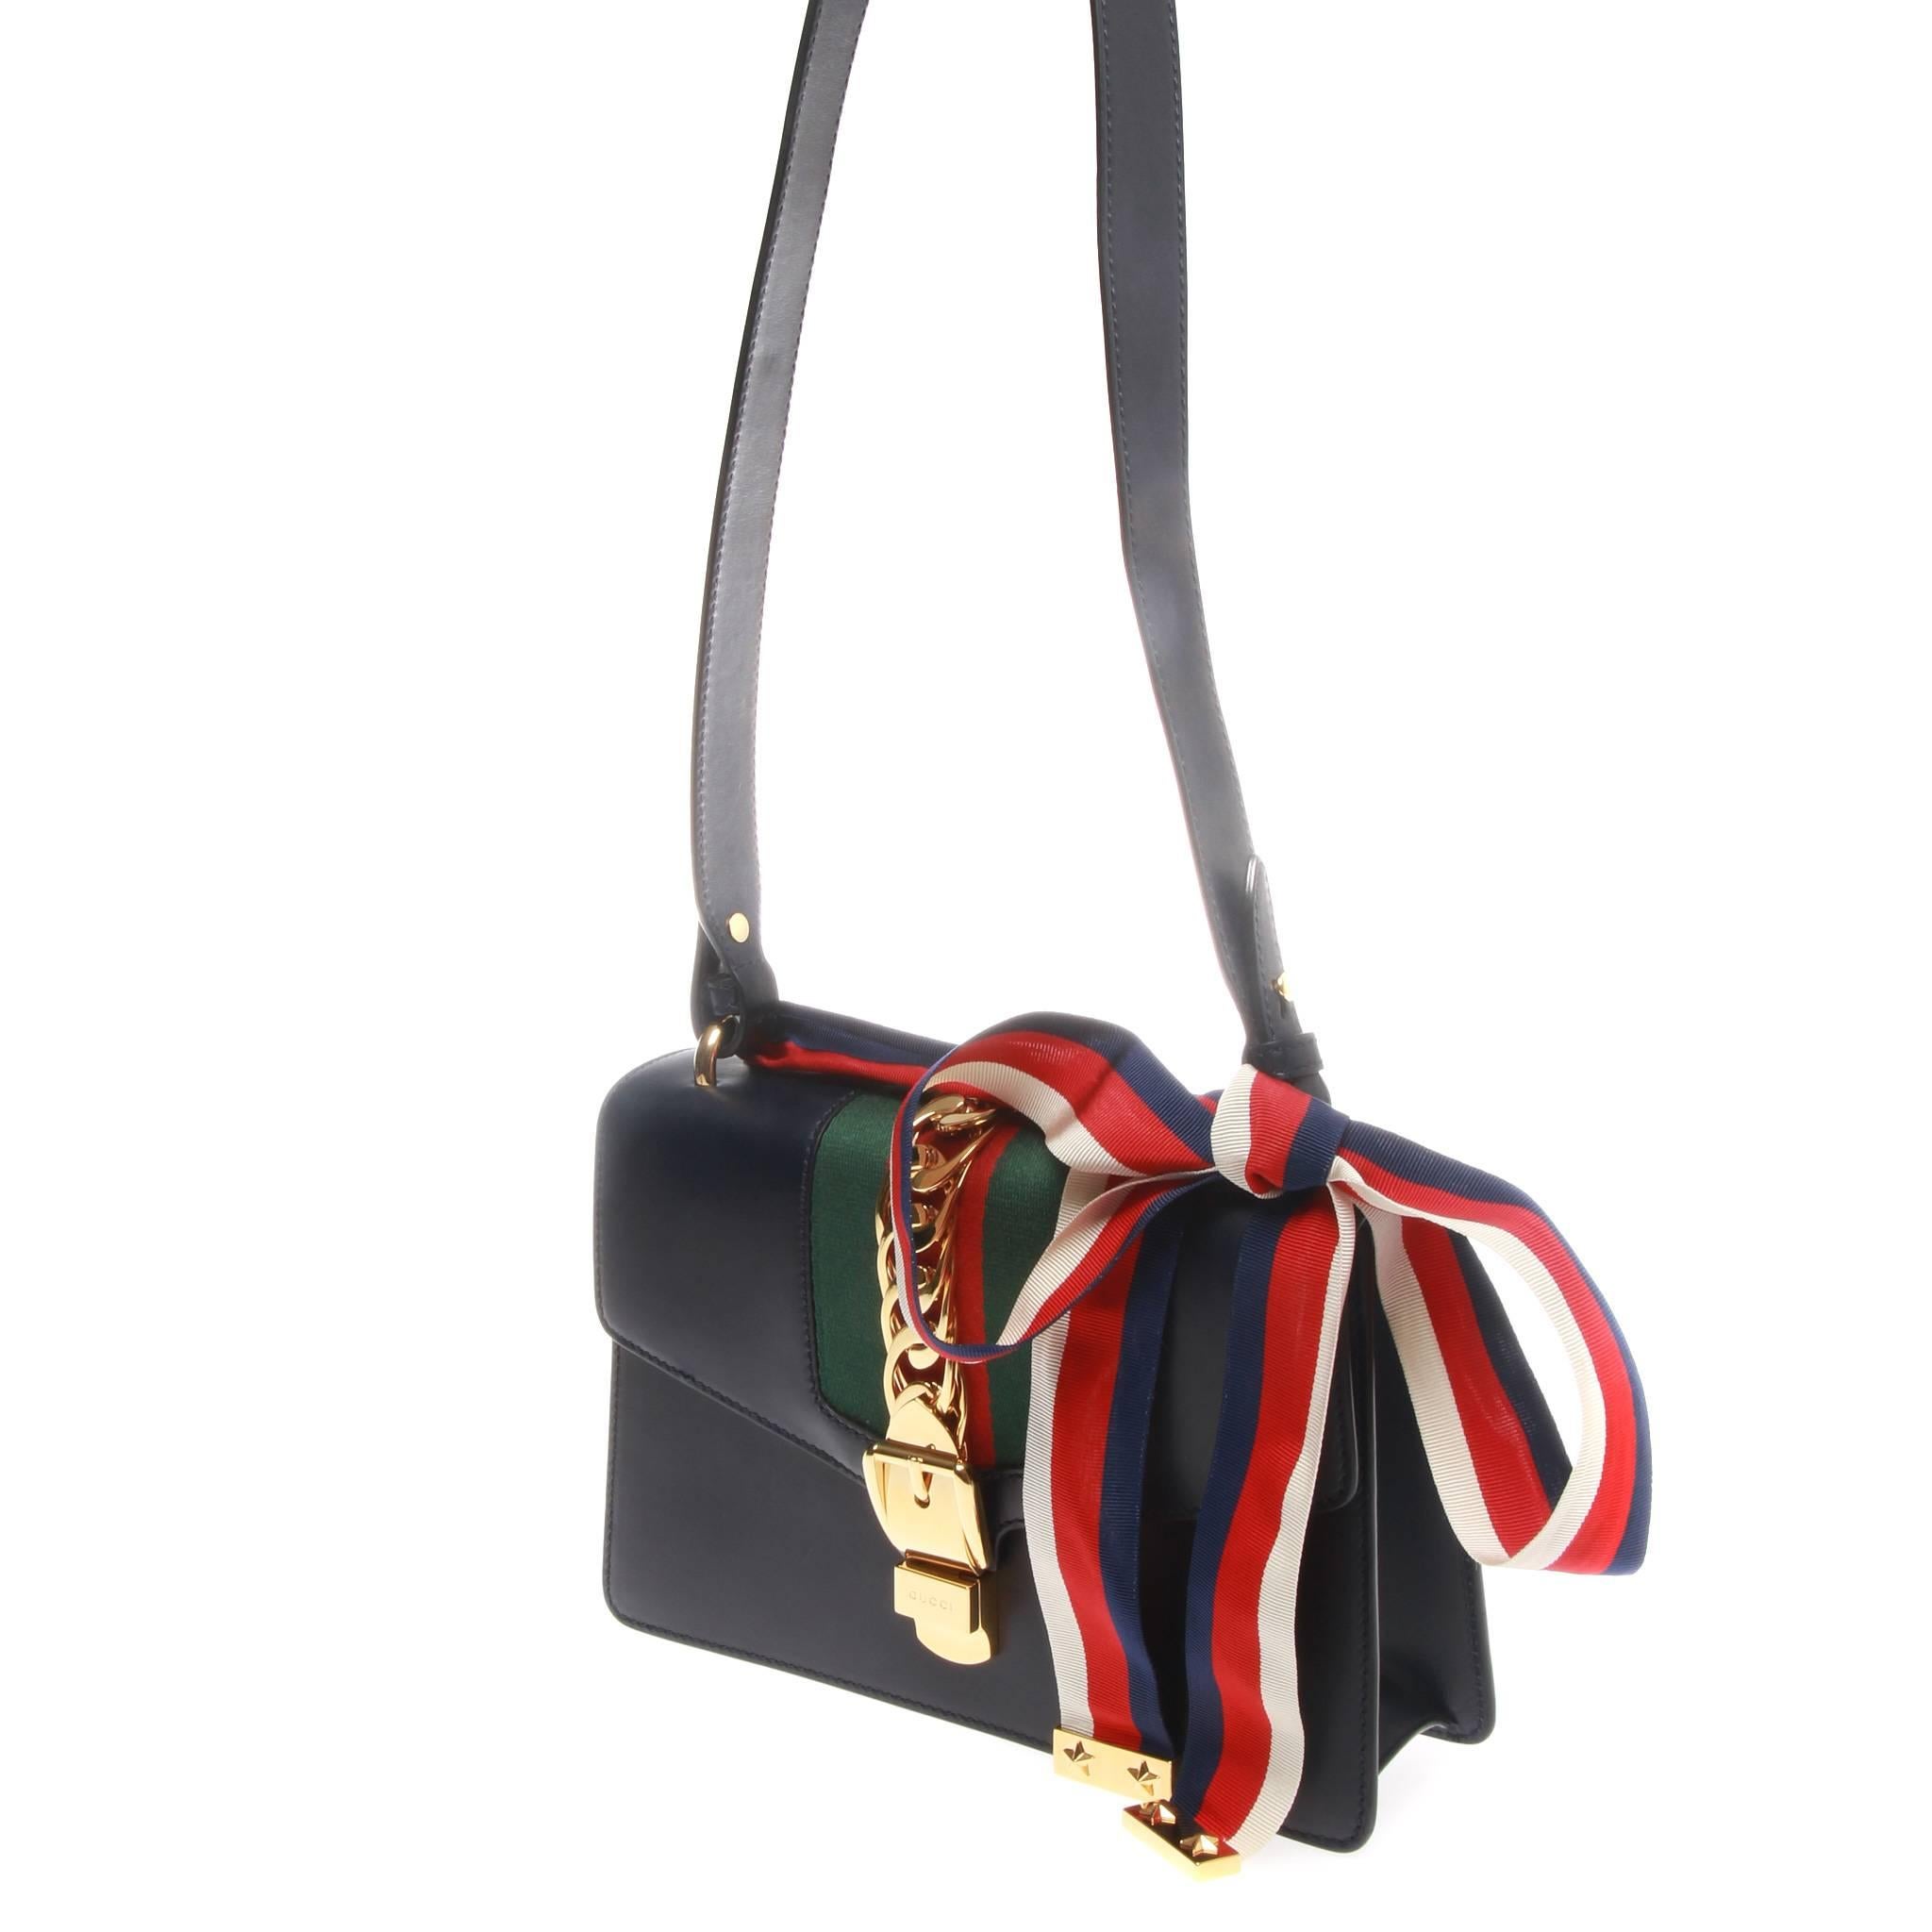 
GUCCI Sylvie Leather Shoulder Bag

A most-wanted Sylvie leather shoulder bag by GUCCI.
This beautiful bag features two interchangeable straps, one in leather the other in blue/red web ribbon. 
The metal buckle closure was taken from the House’s